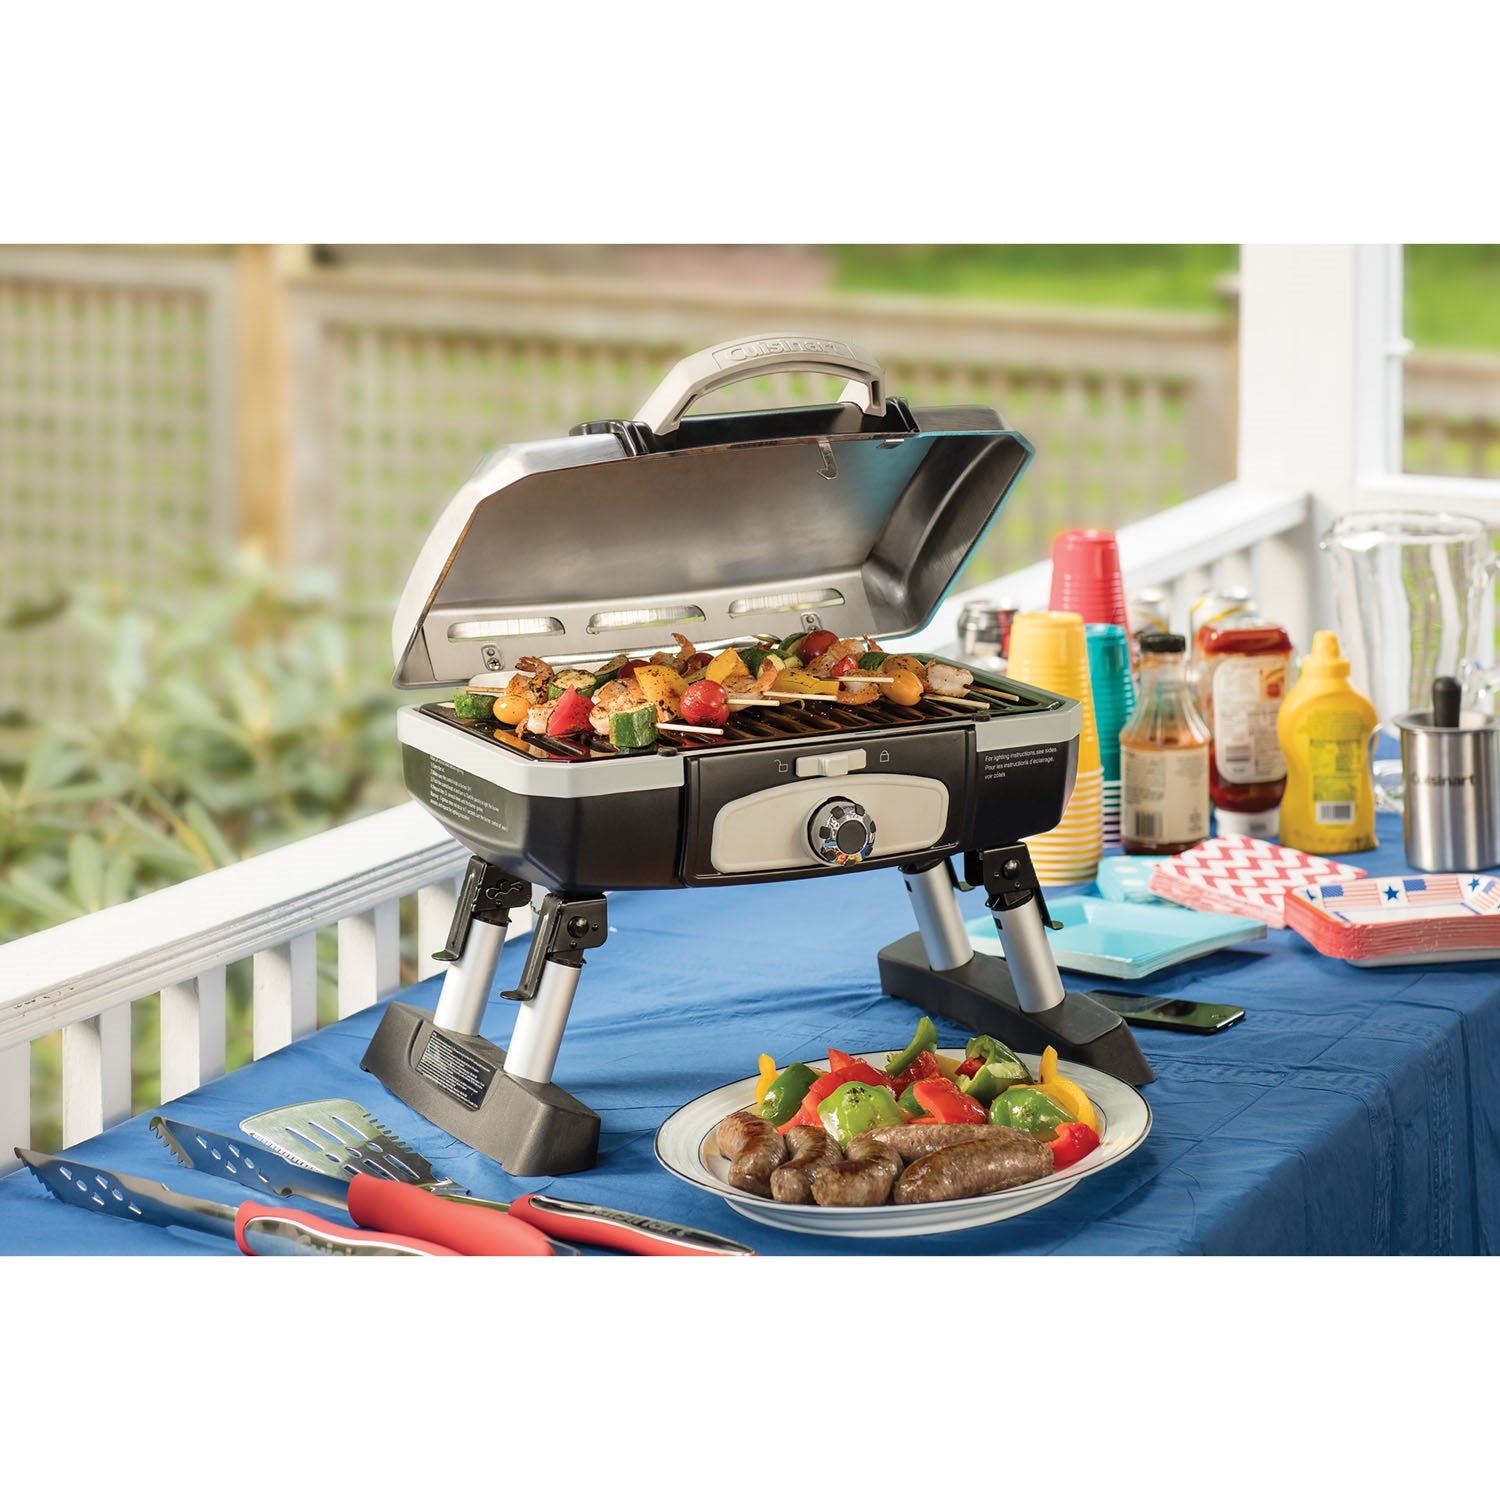 Cuisinart Petit Gourmet Portable Tabletop Outdoor LP Gas Grill in Silver/Black